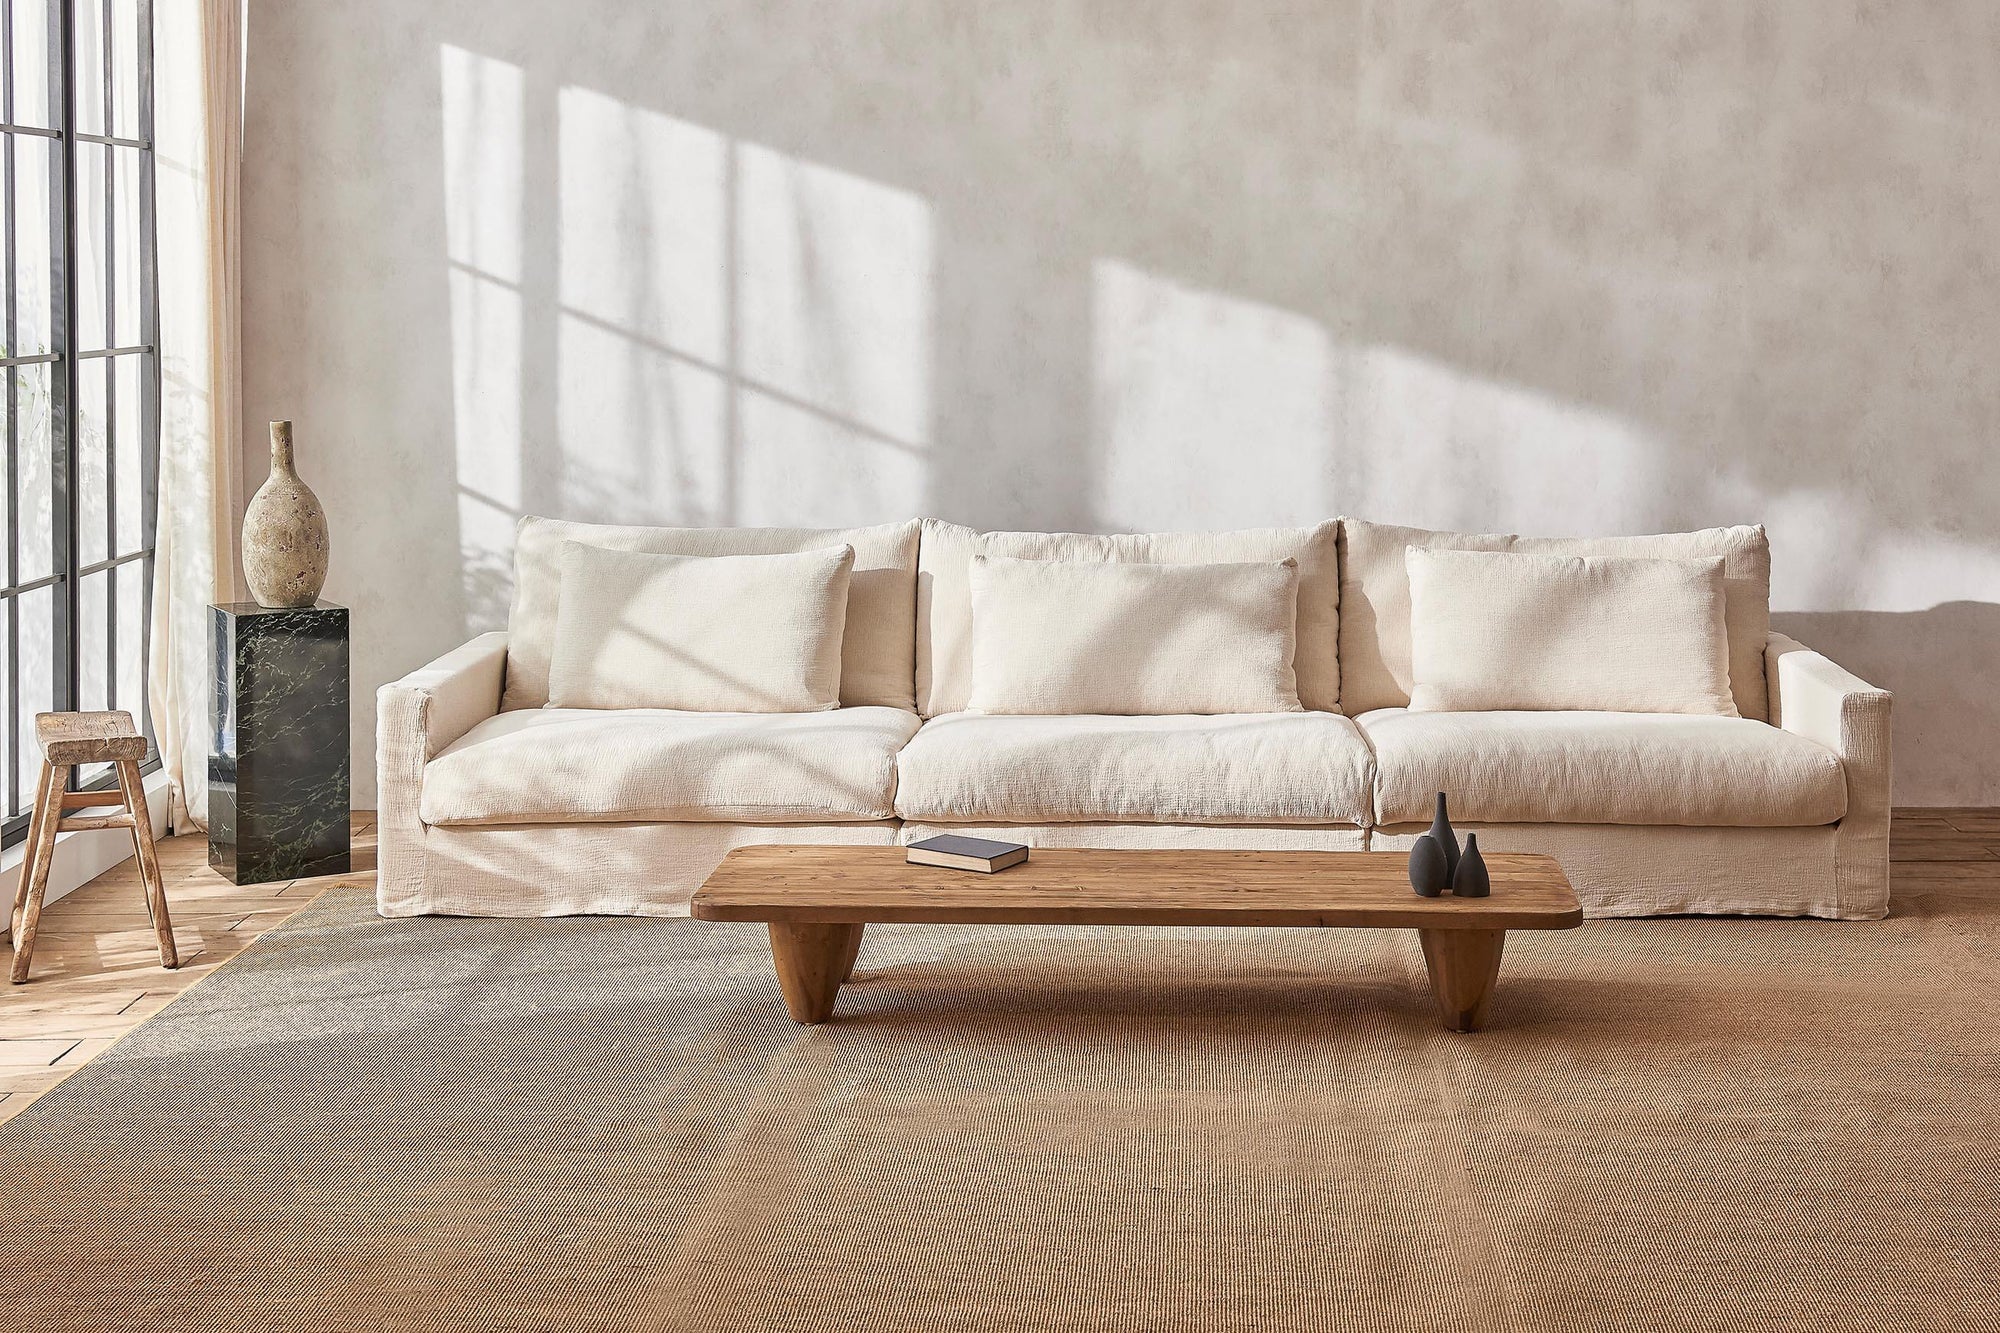 Devyn Sectional Sofa in Corn Silk, a light beige Washed Cotton Linen, placed in a decorated sunlit room with a Theo Coffee Table